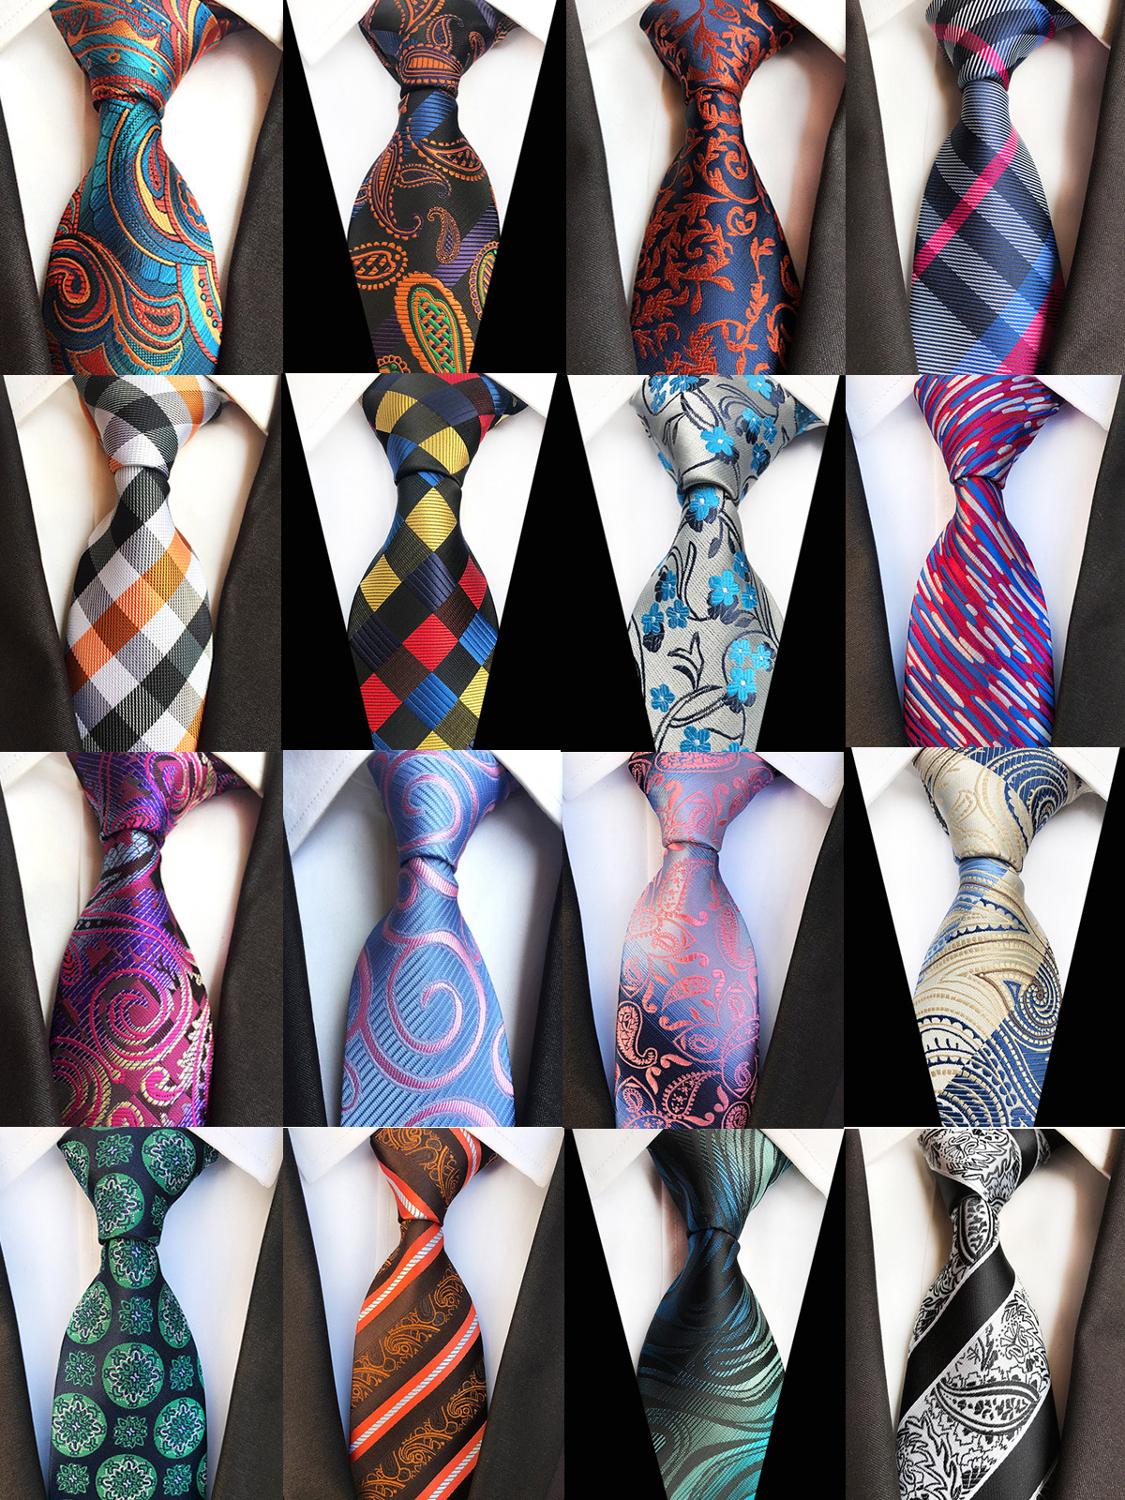 New 8CM MAN Classic Tie Stain Flora Jacquard Woven Neck Tie Wedding Party Ties 